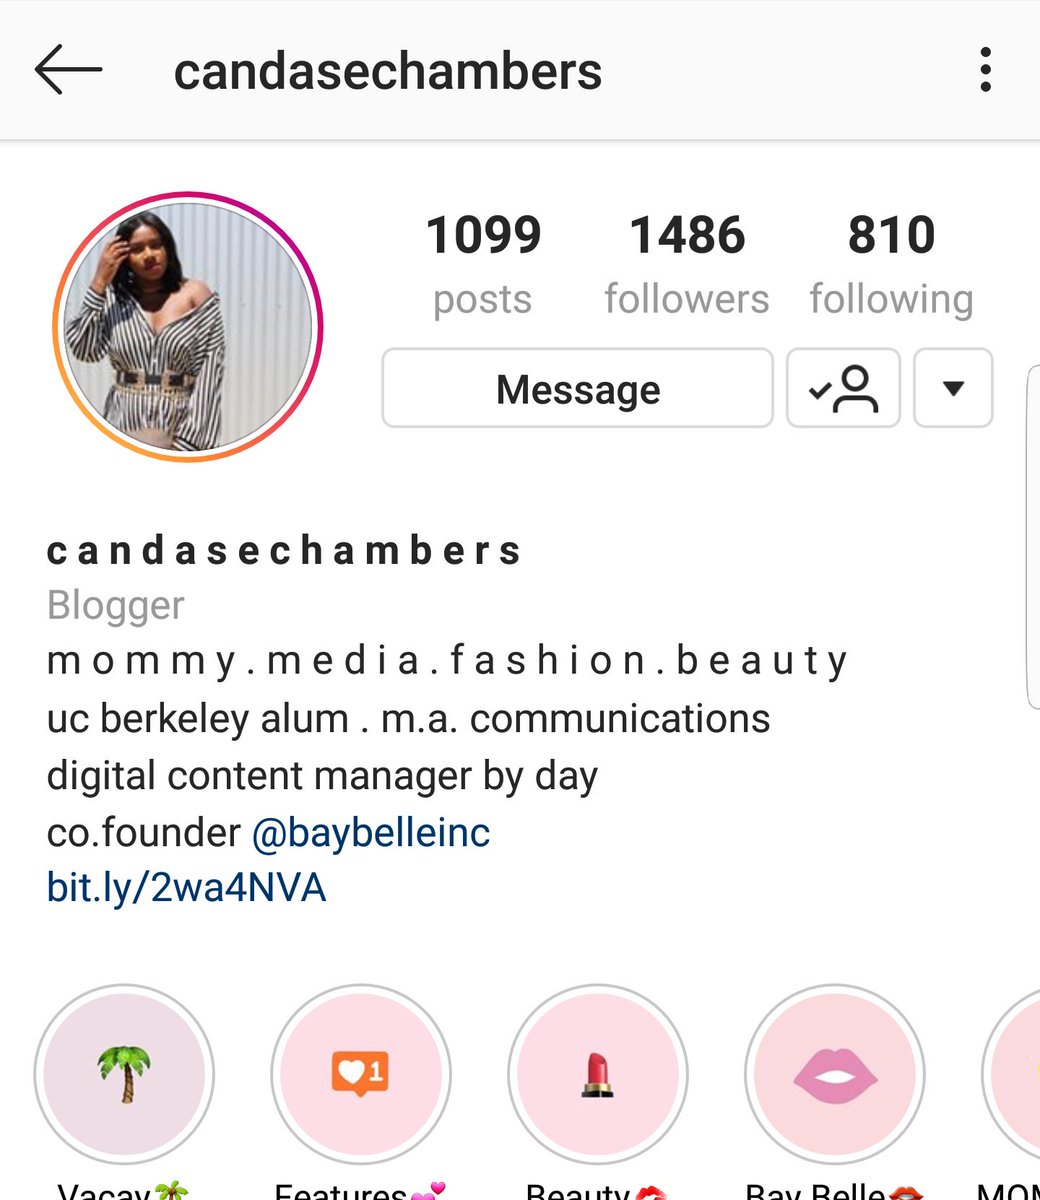 Candase Chambers IG:candasechambersDigital Content Manager Co-founder of BayBelleInc